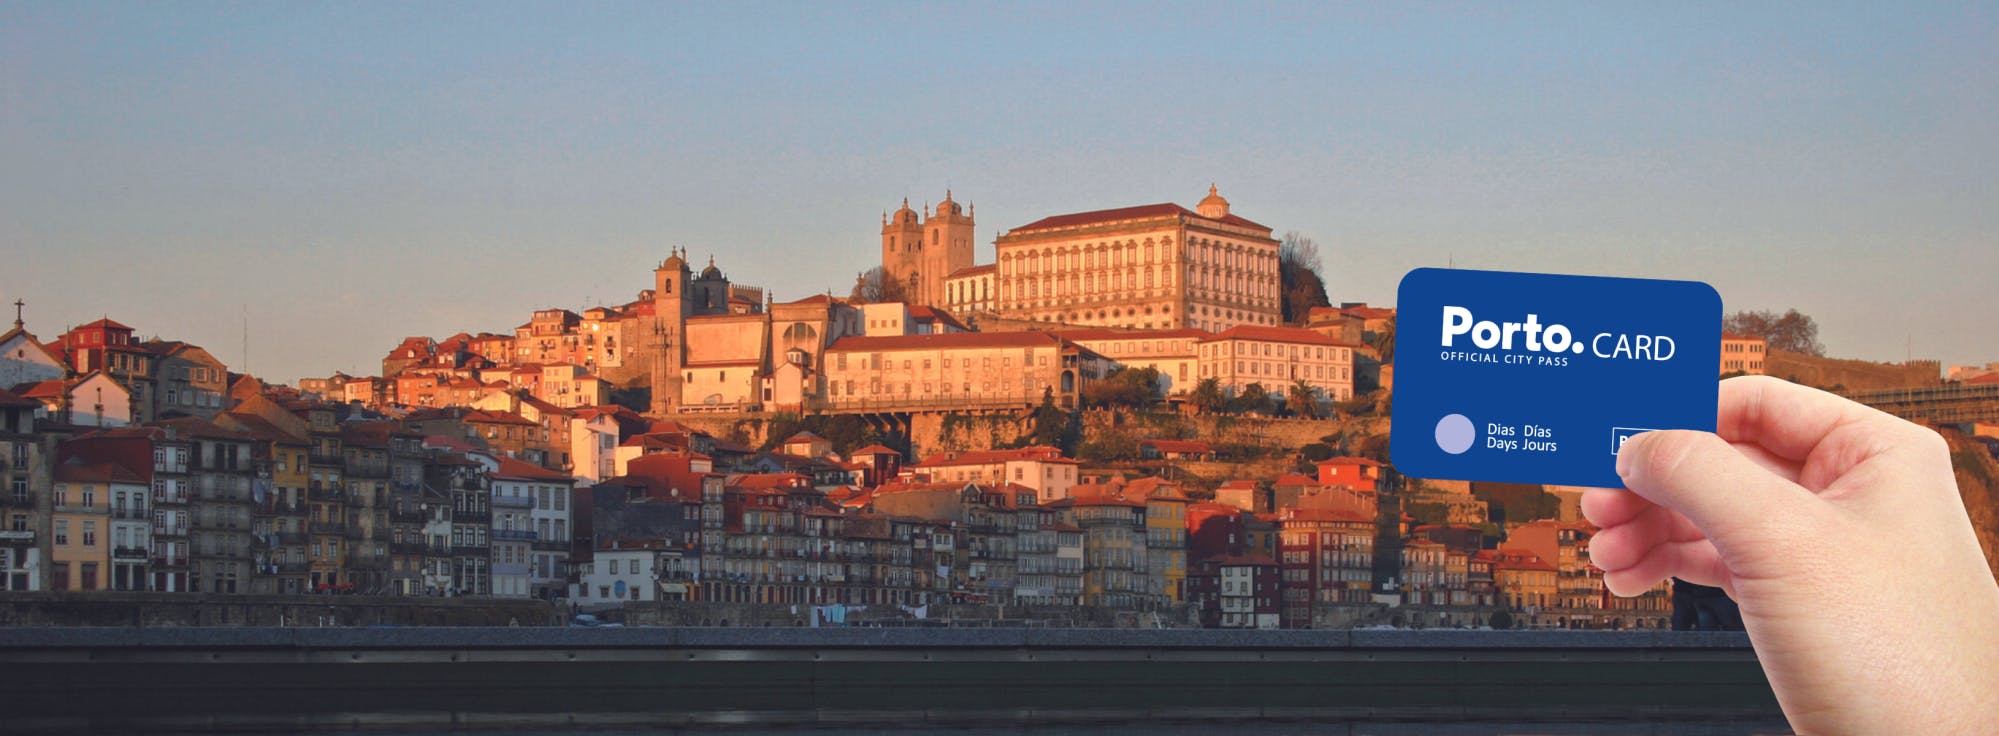 Porto Card for 1 2 3 or 4 days with without transport